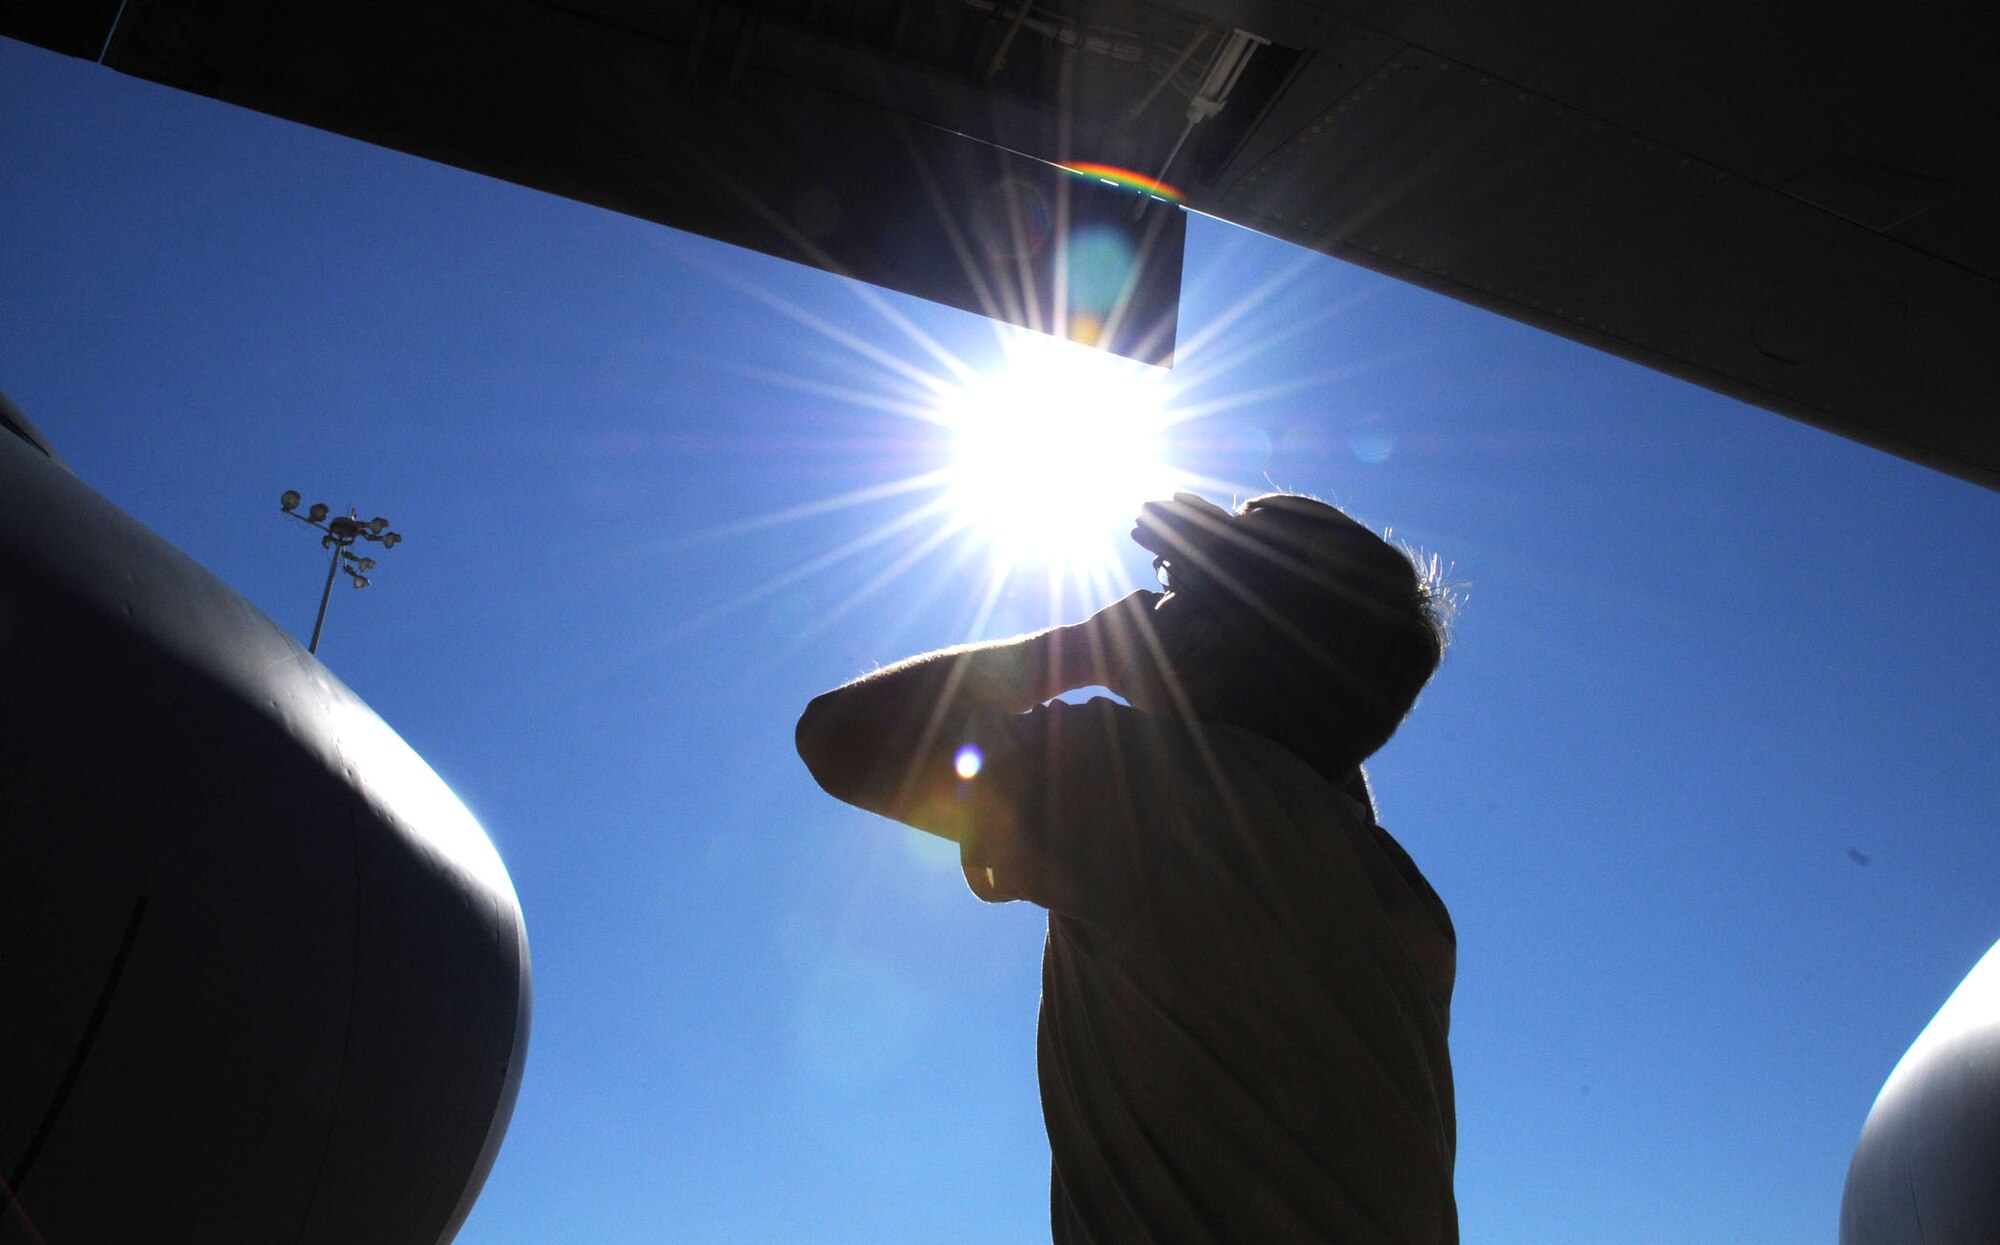 MacDill Air Force Base, Fla. --  Senior Airman Kyle Steady, a crew chief with the 927th Air Refueling Wing, braves the afternoon sun here to make sure there were no leaks around the wings of a KC-135 tanker aircraft. Steady participated in a recent operational readiness exercise that required the unit to deploy airplane tankers to refuel tactical aircraft on short notice.  Steady has the responsibility of making sure the plane was flight-ready at all times. (Official United States Air Force photo by Staff Sgt. Shawn C. Rhodes)